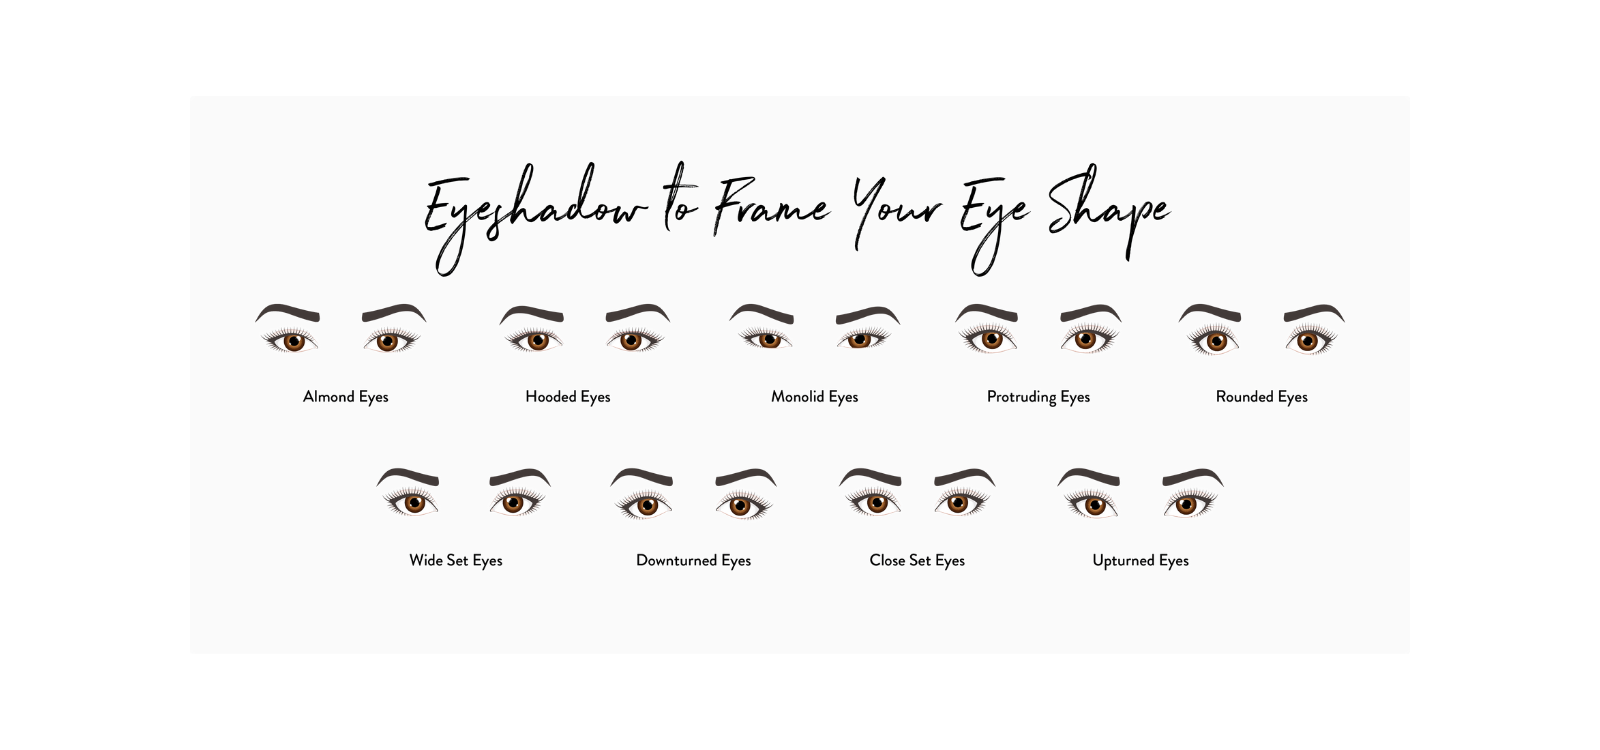 I’m in Love With the Shape of You: How to Apply Eyeshadow for your Eye Shape